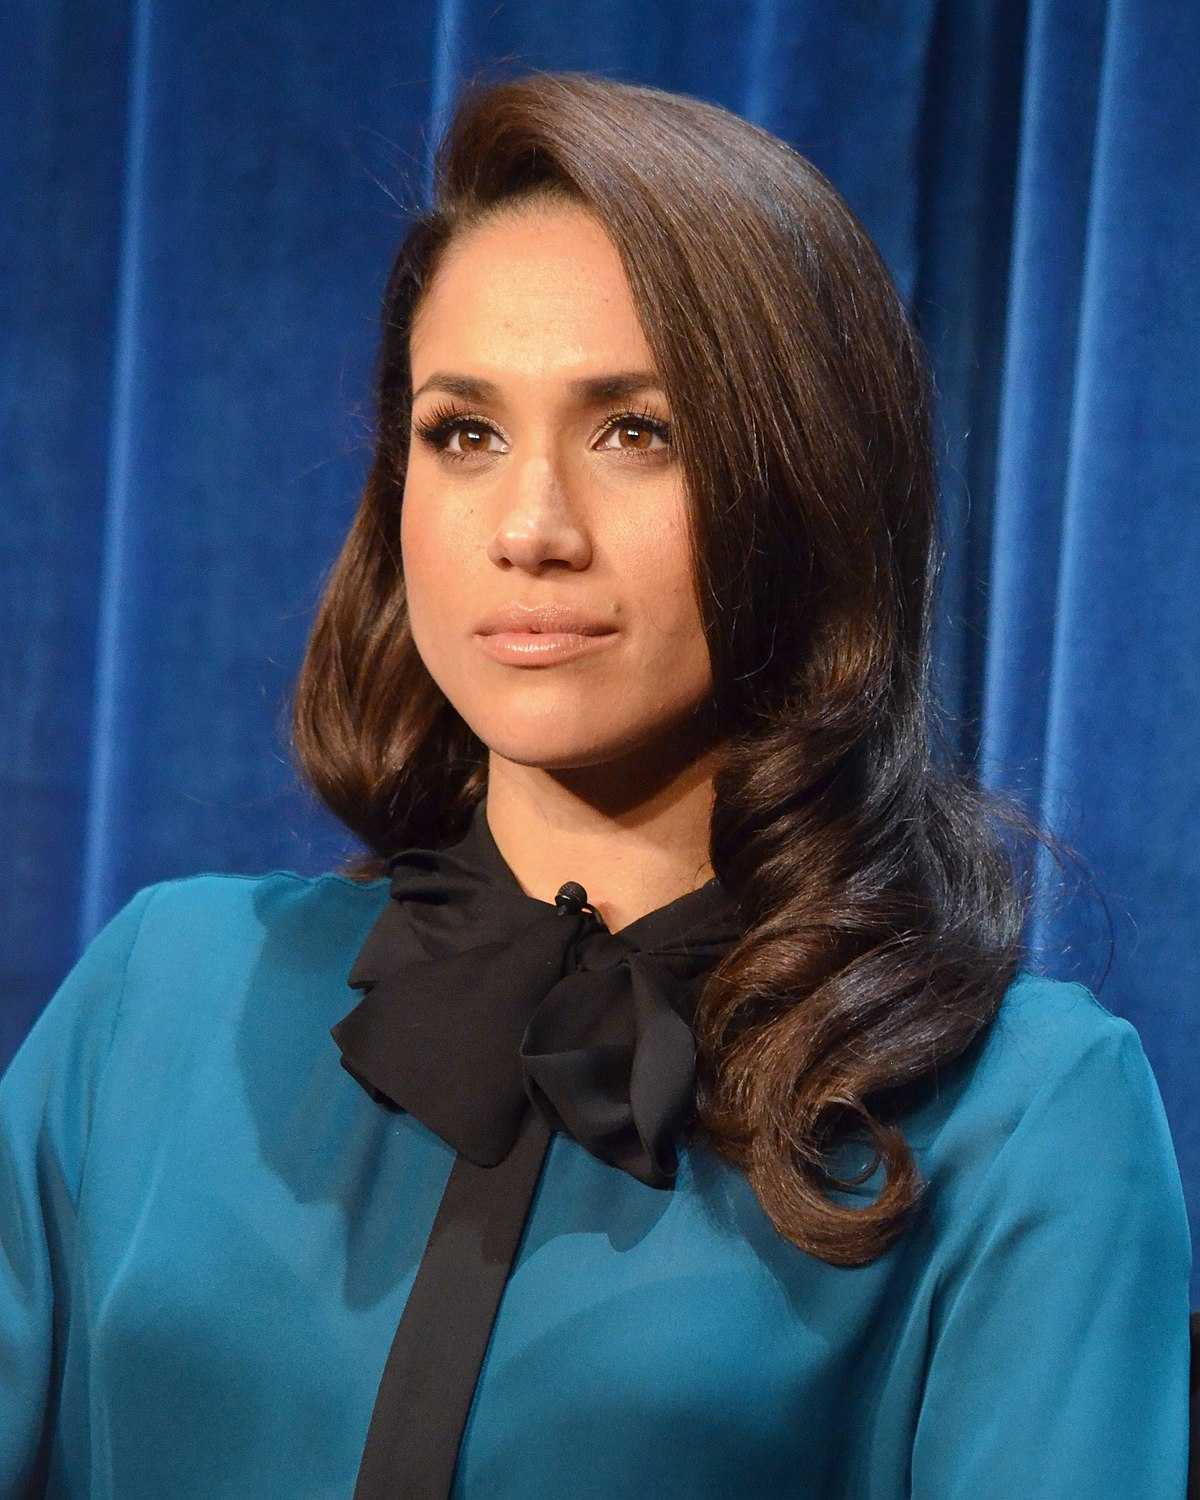 70+ Hot Pictures Of Meghan Markle Which Are Just Too Hot To Handle 13